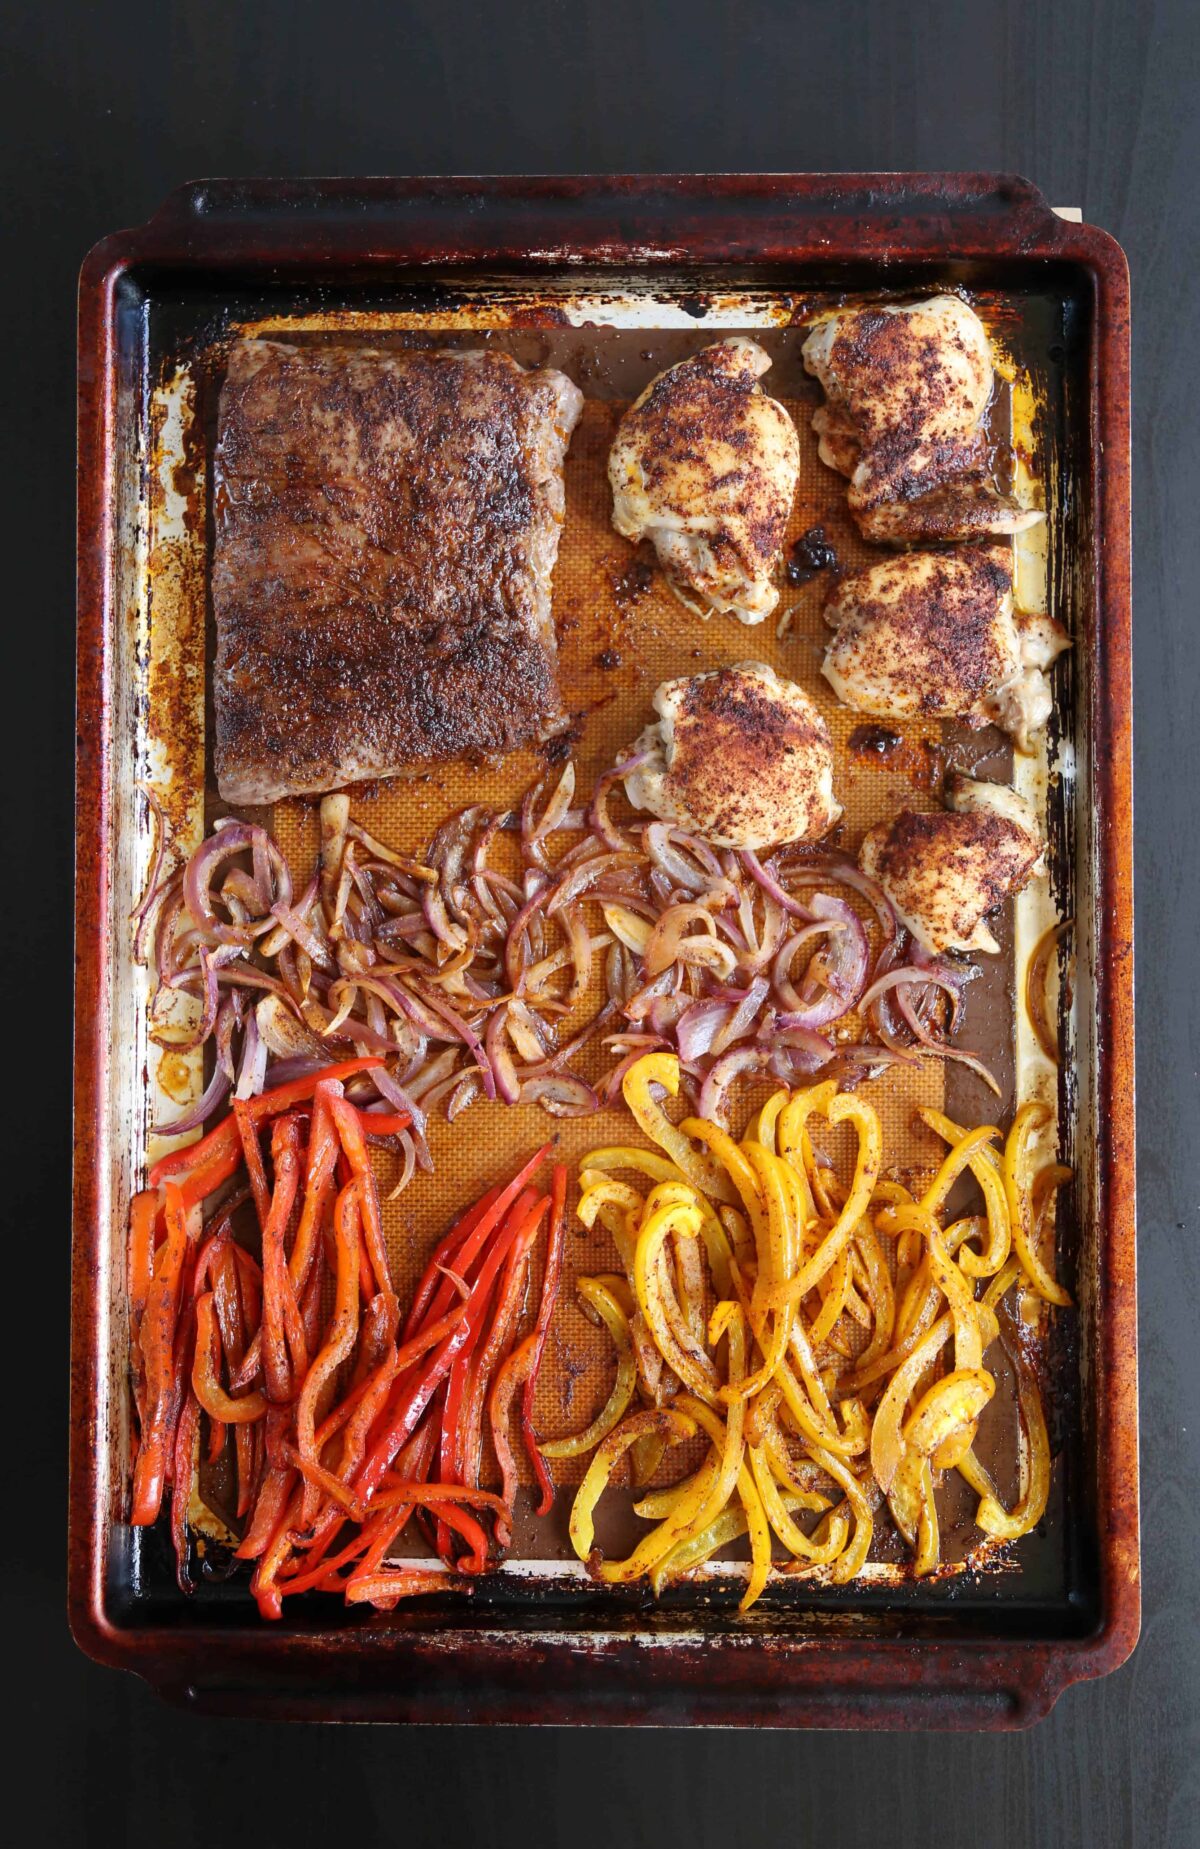 cooked meat and veggies on a sheet pan